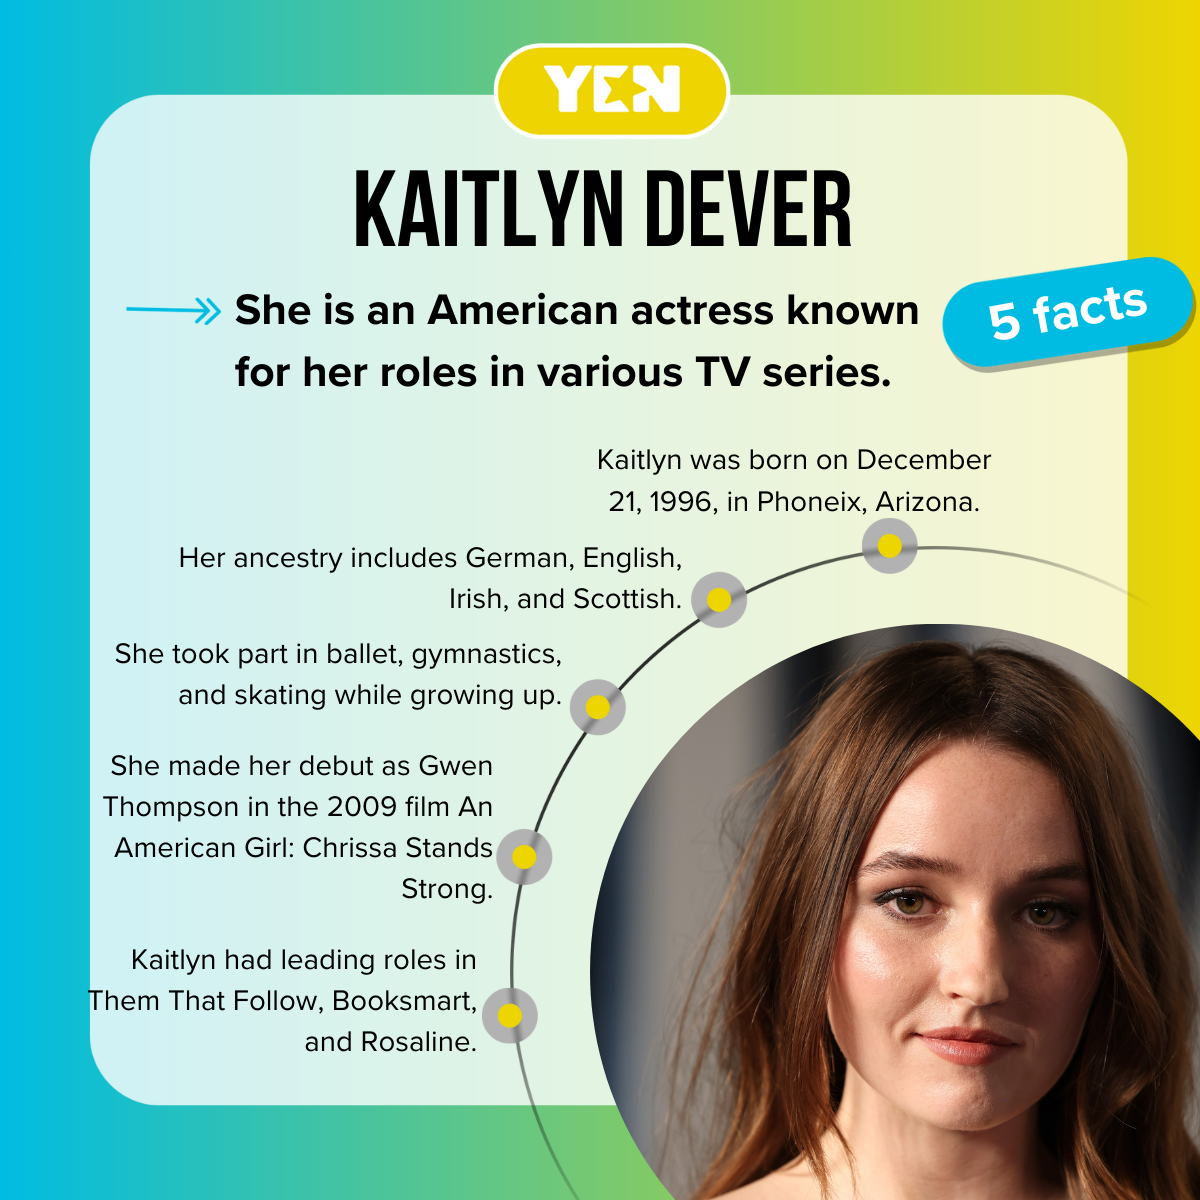 5 facts about Kaitlyn Dever